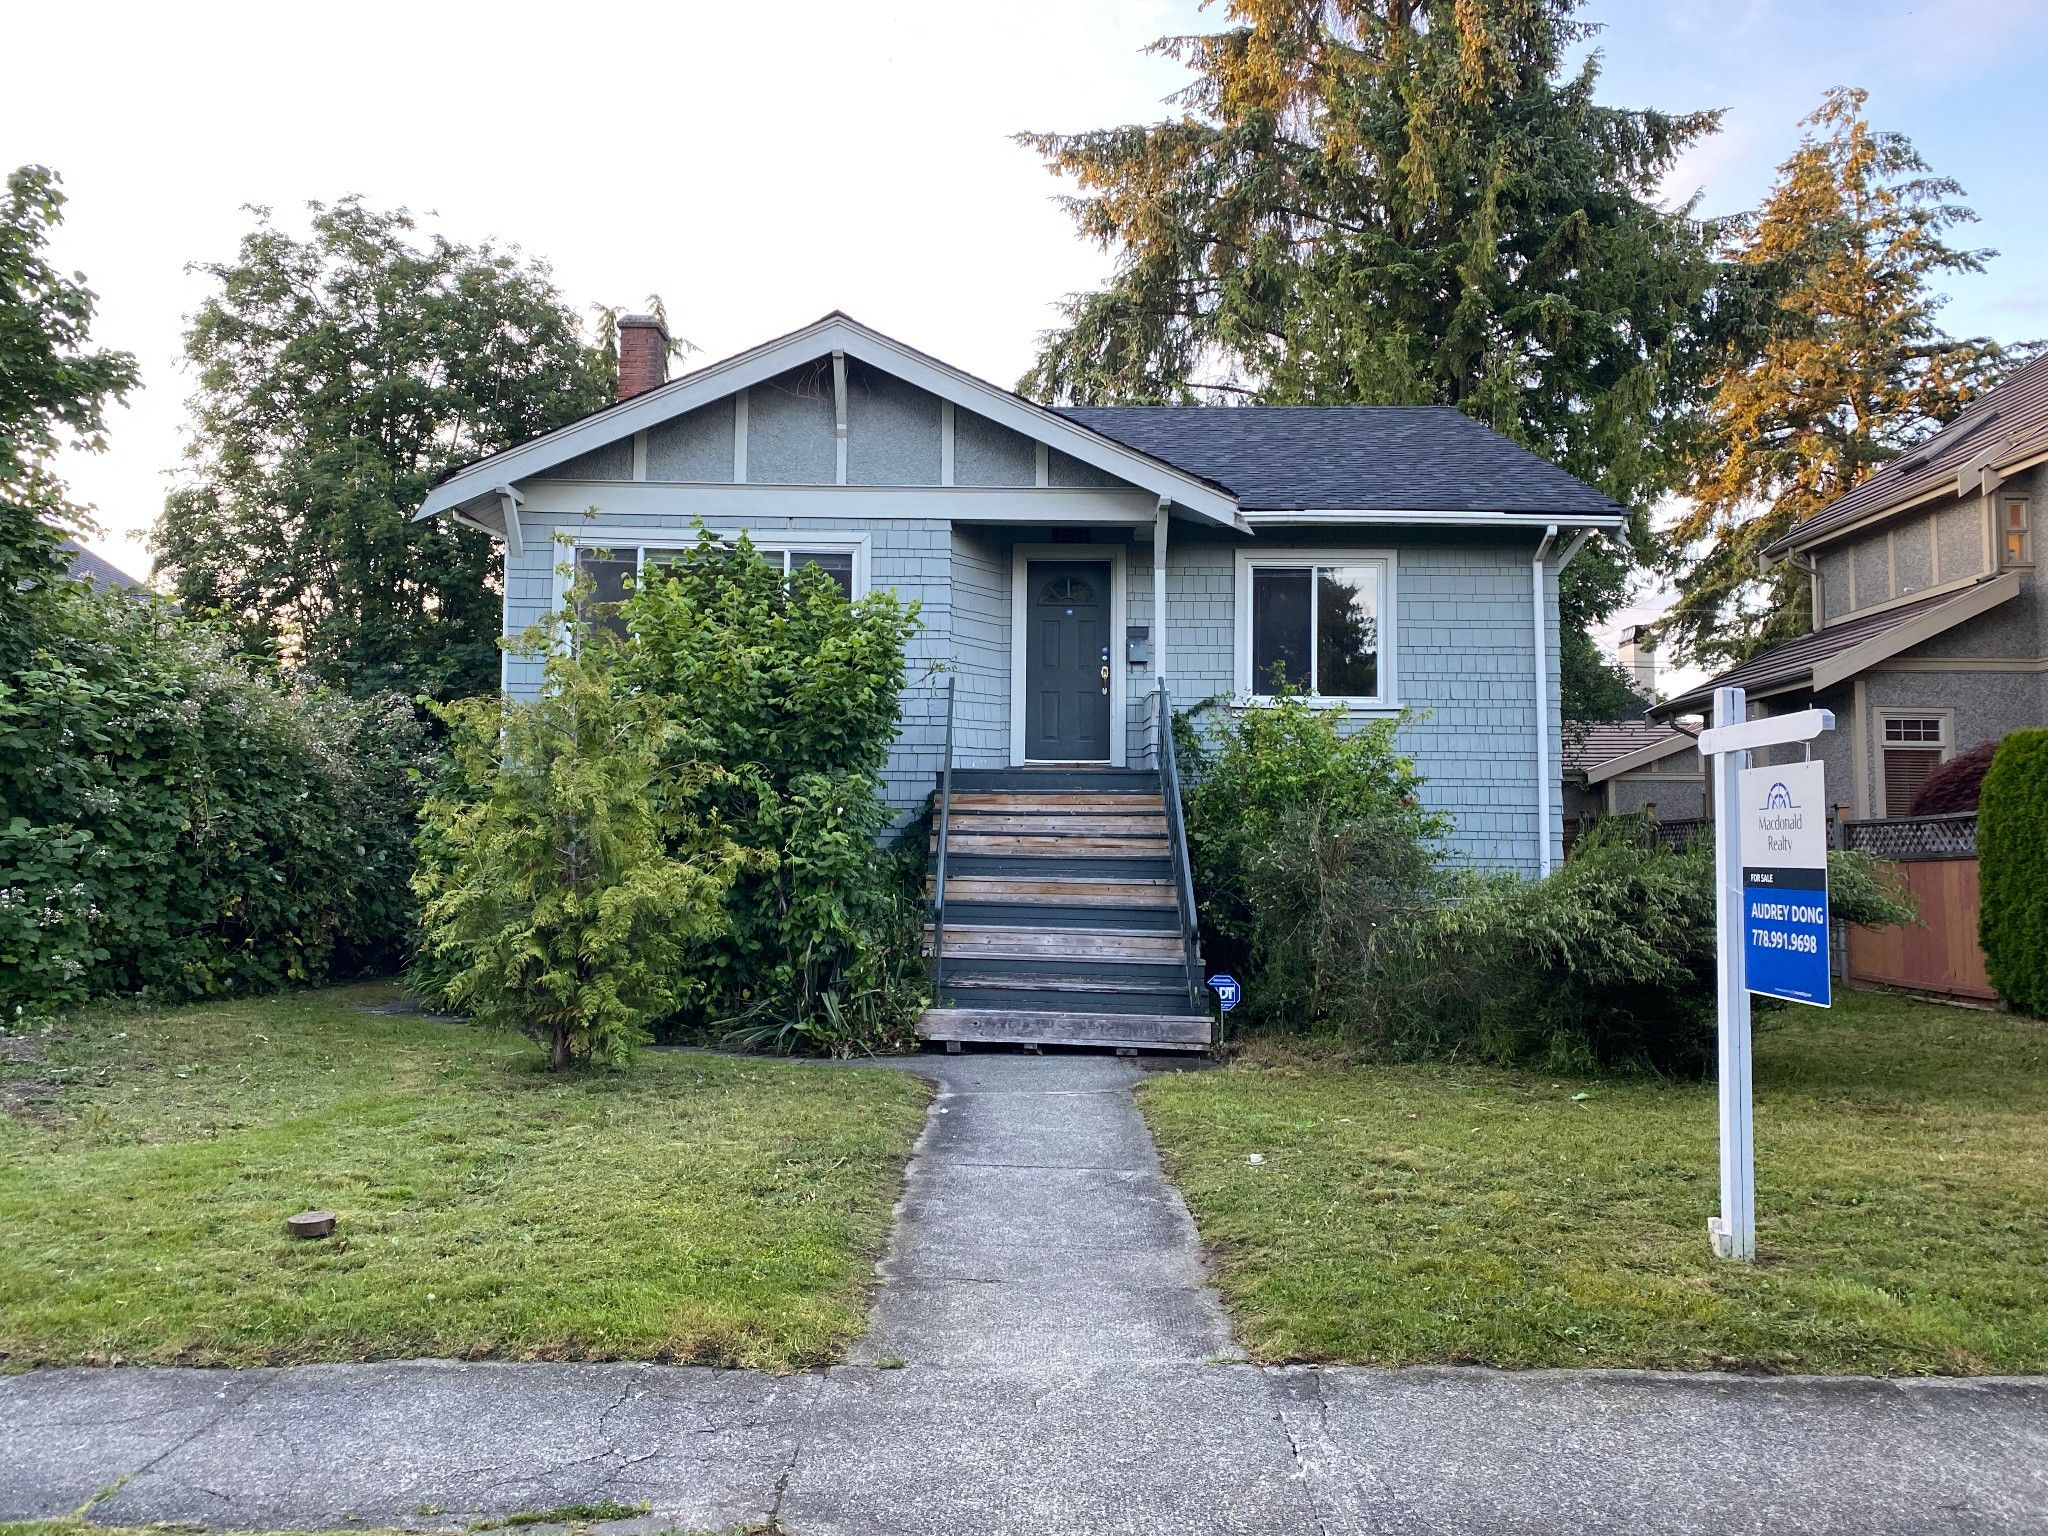 Main Photo: 2015 WEST 44TH AV in VANCOUVER: Kerrisdale House for sale (Vancouver West)  : MLS®# R2469454